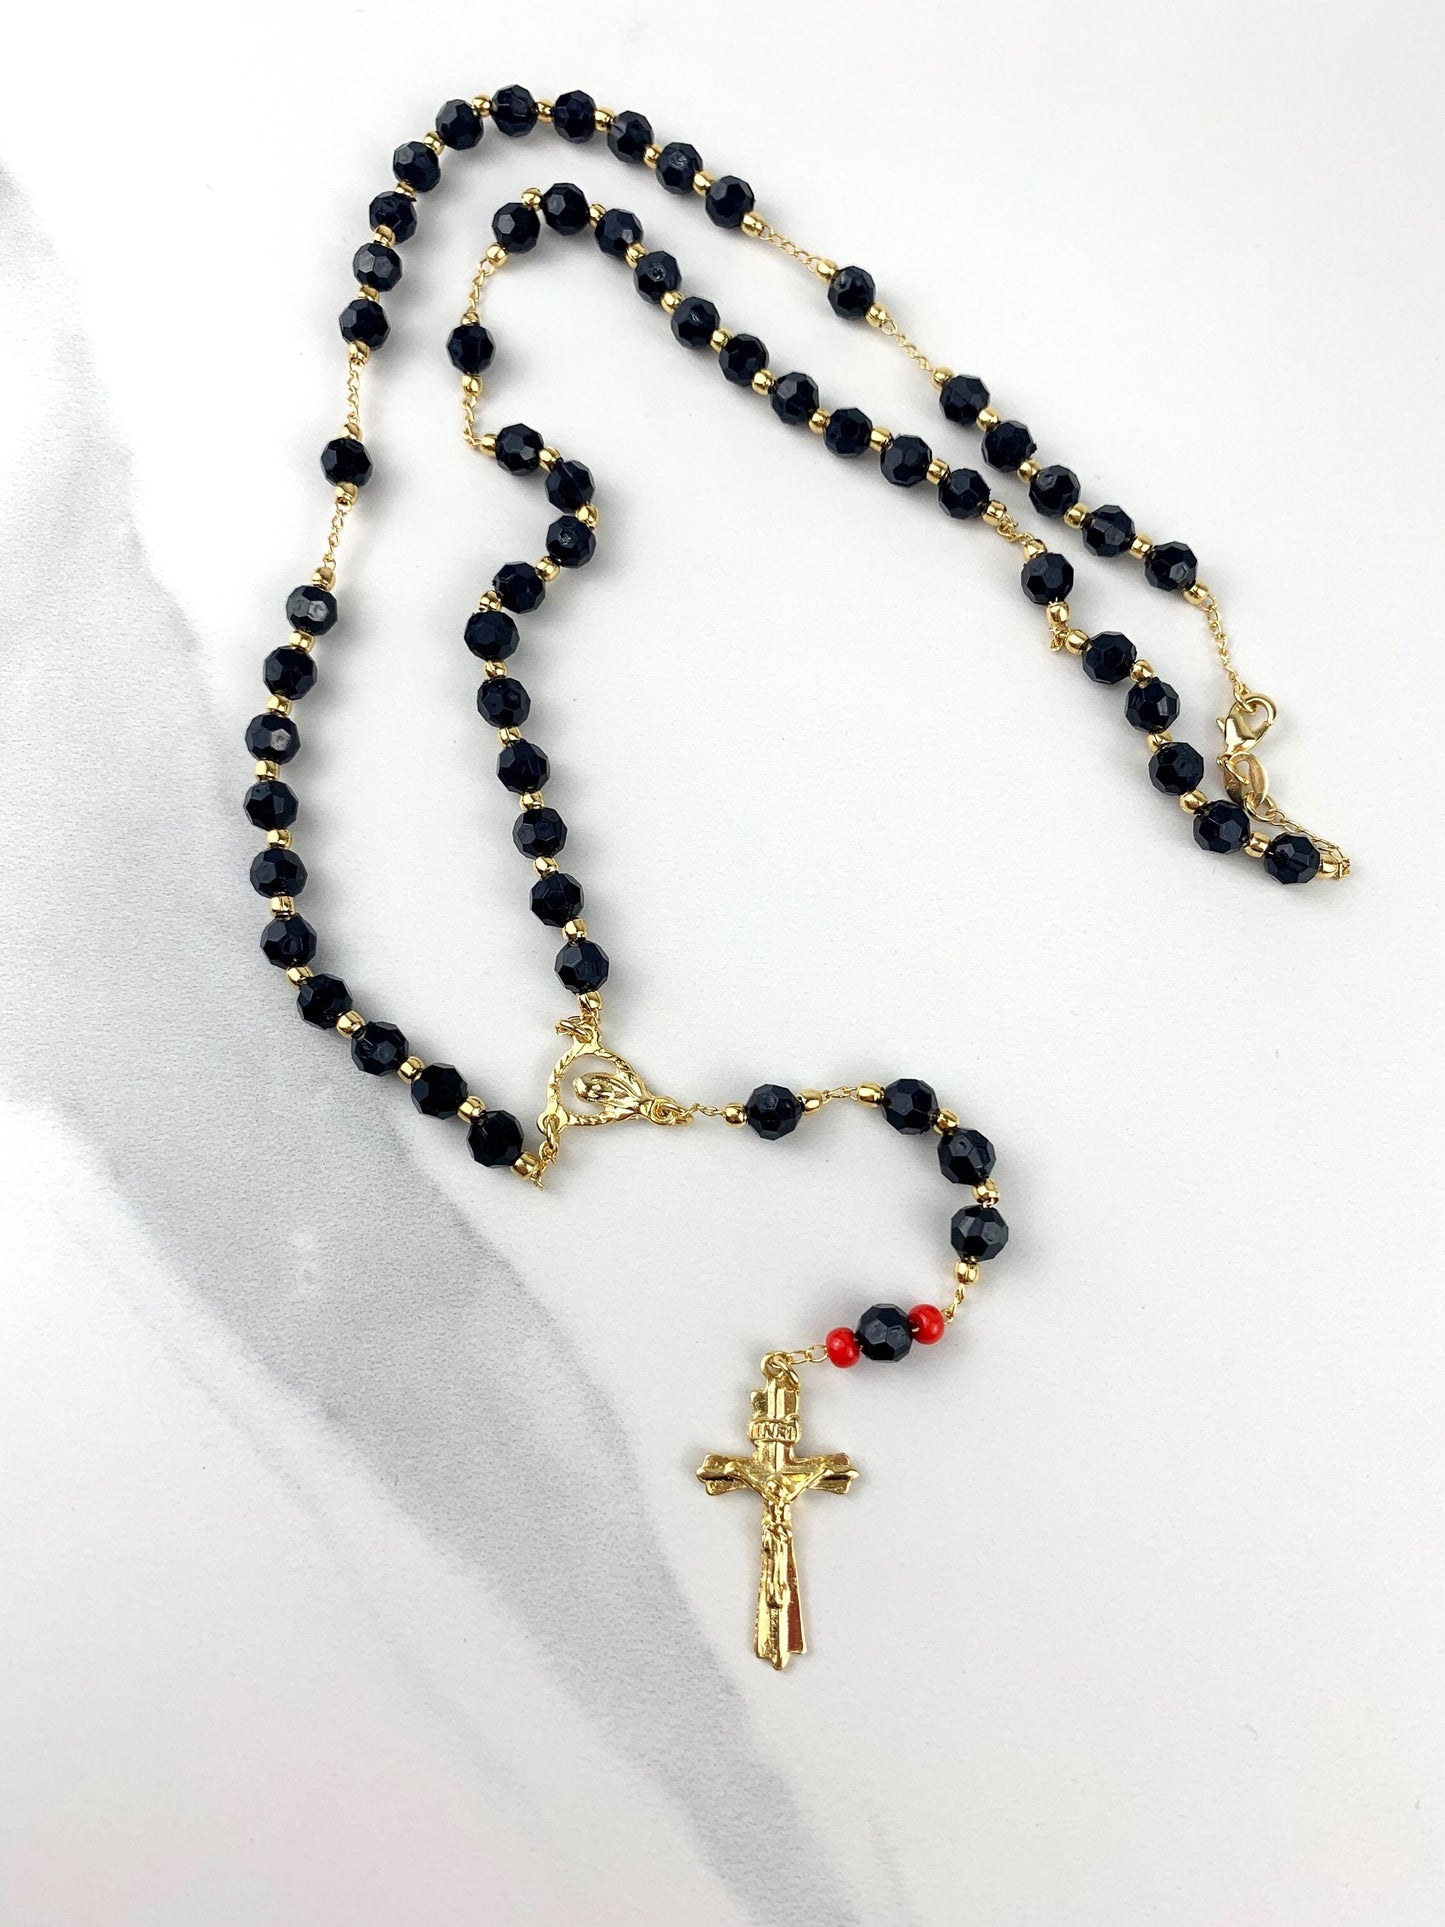 18k Gold Filled Black Red Beads Simulated Azabache Virgin Mary, Ave Maria Beaded Rosary Necklace Bracelet, Religious Wholesale Jewelry